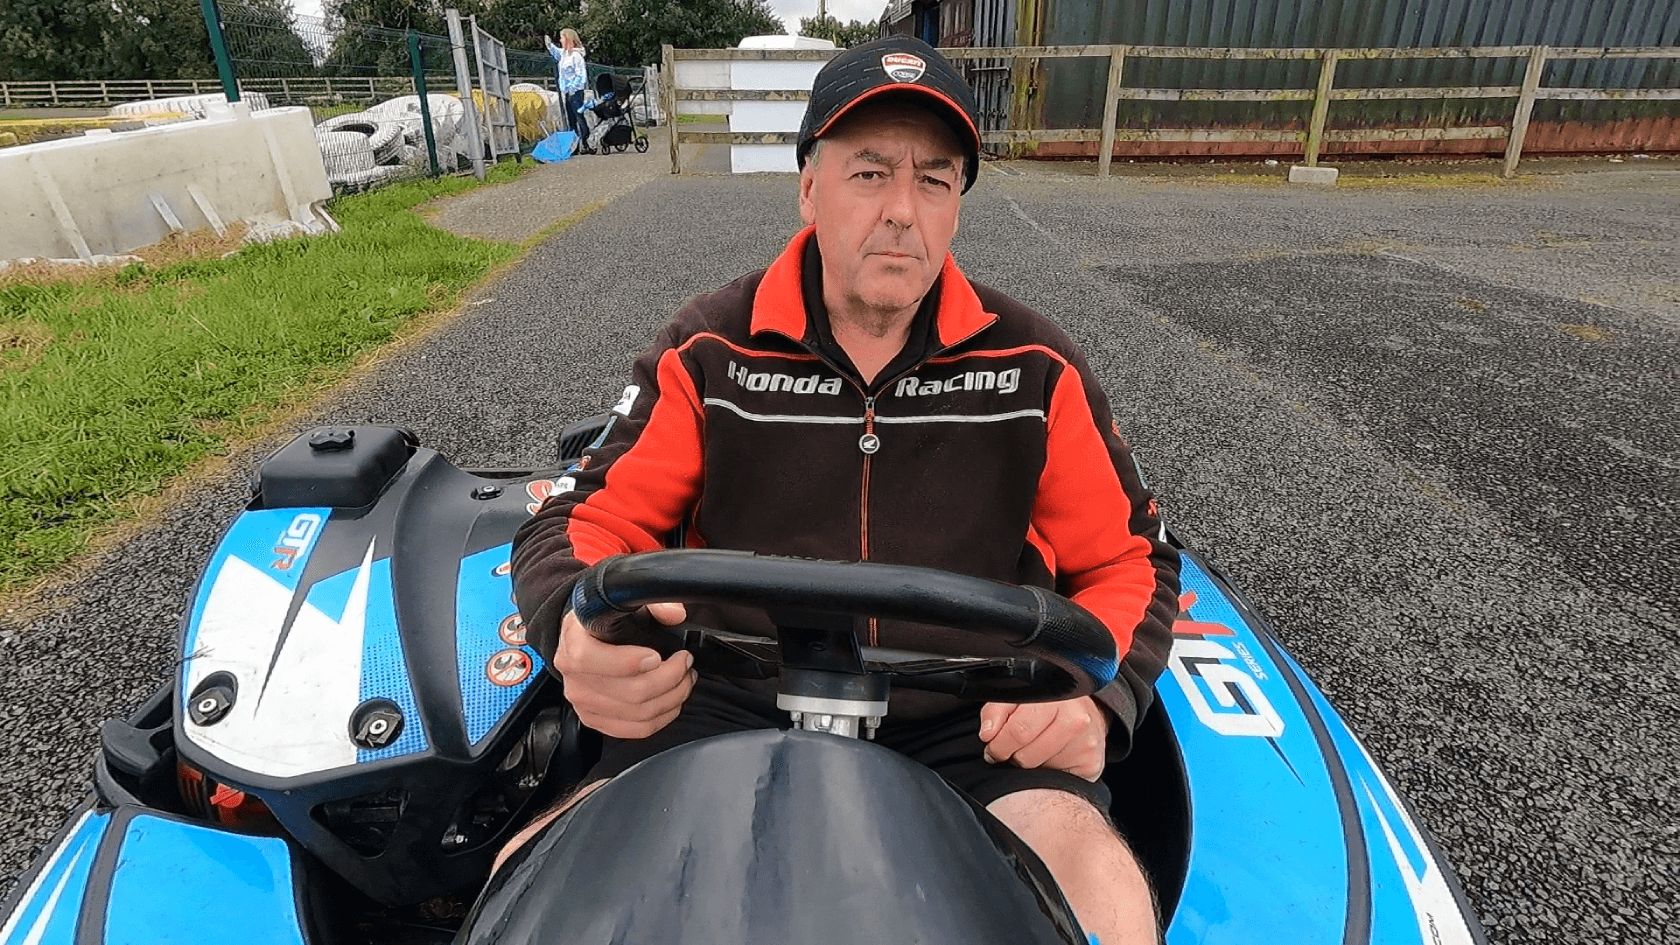 Athboy Karting track owner seated in a go-kart, ready for action